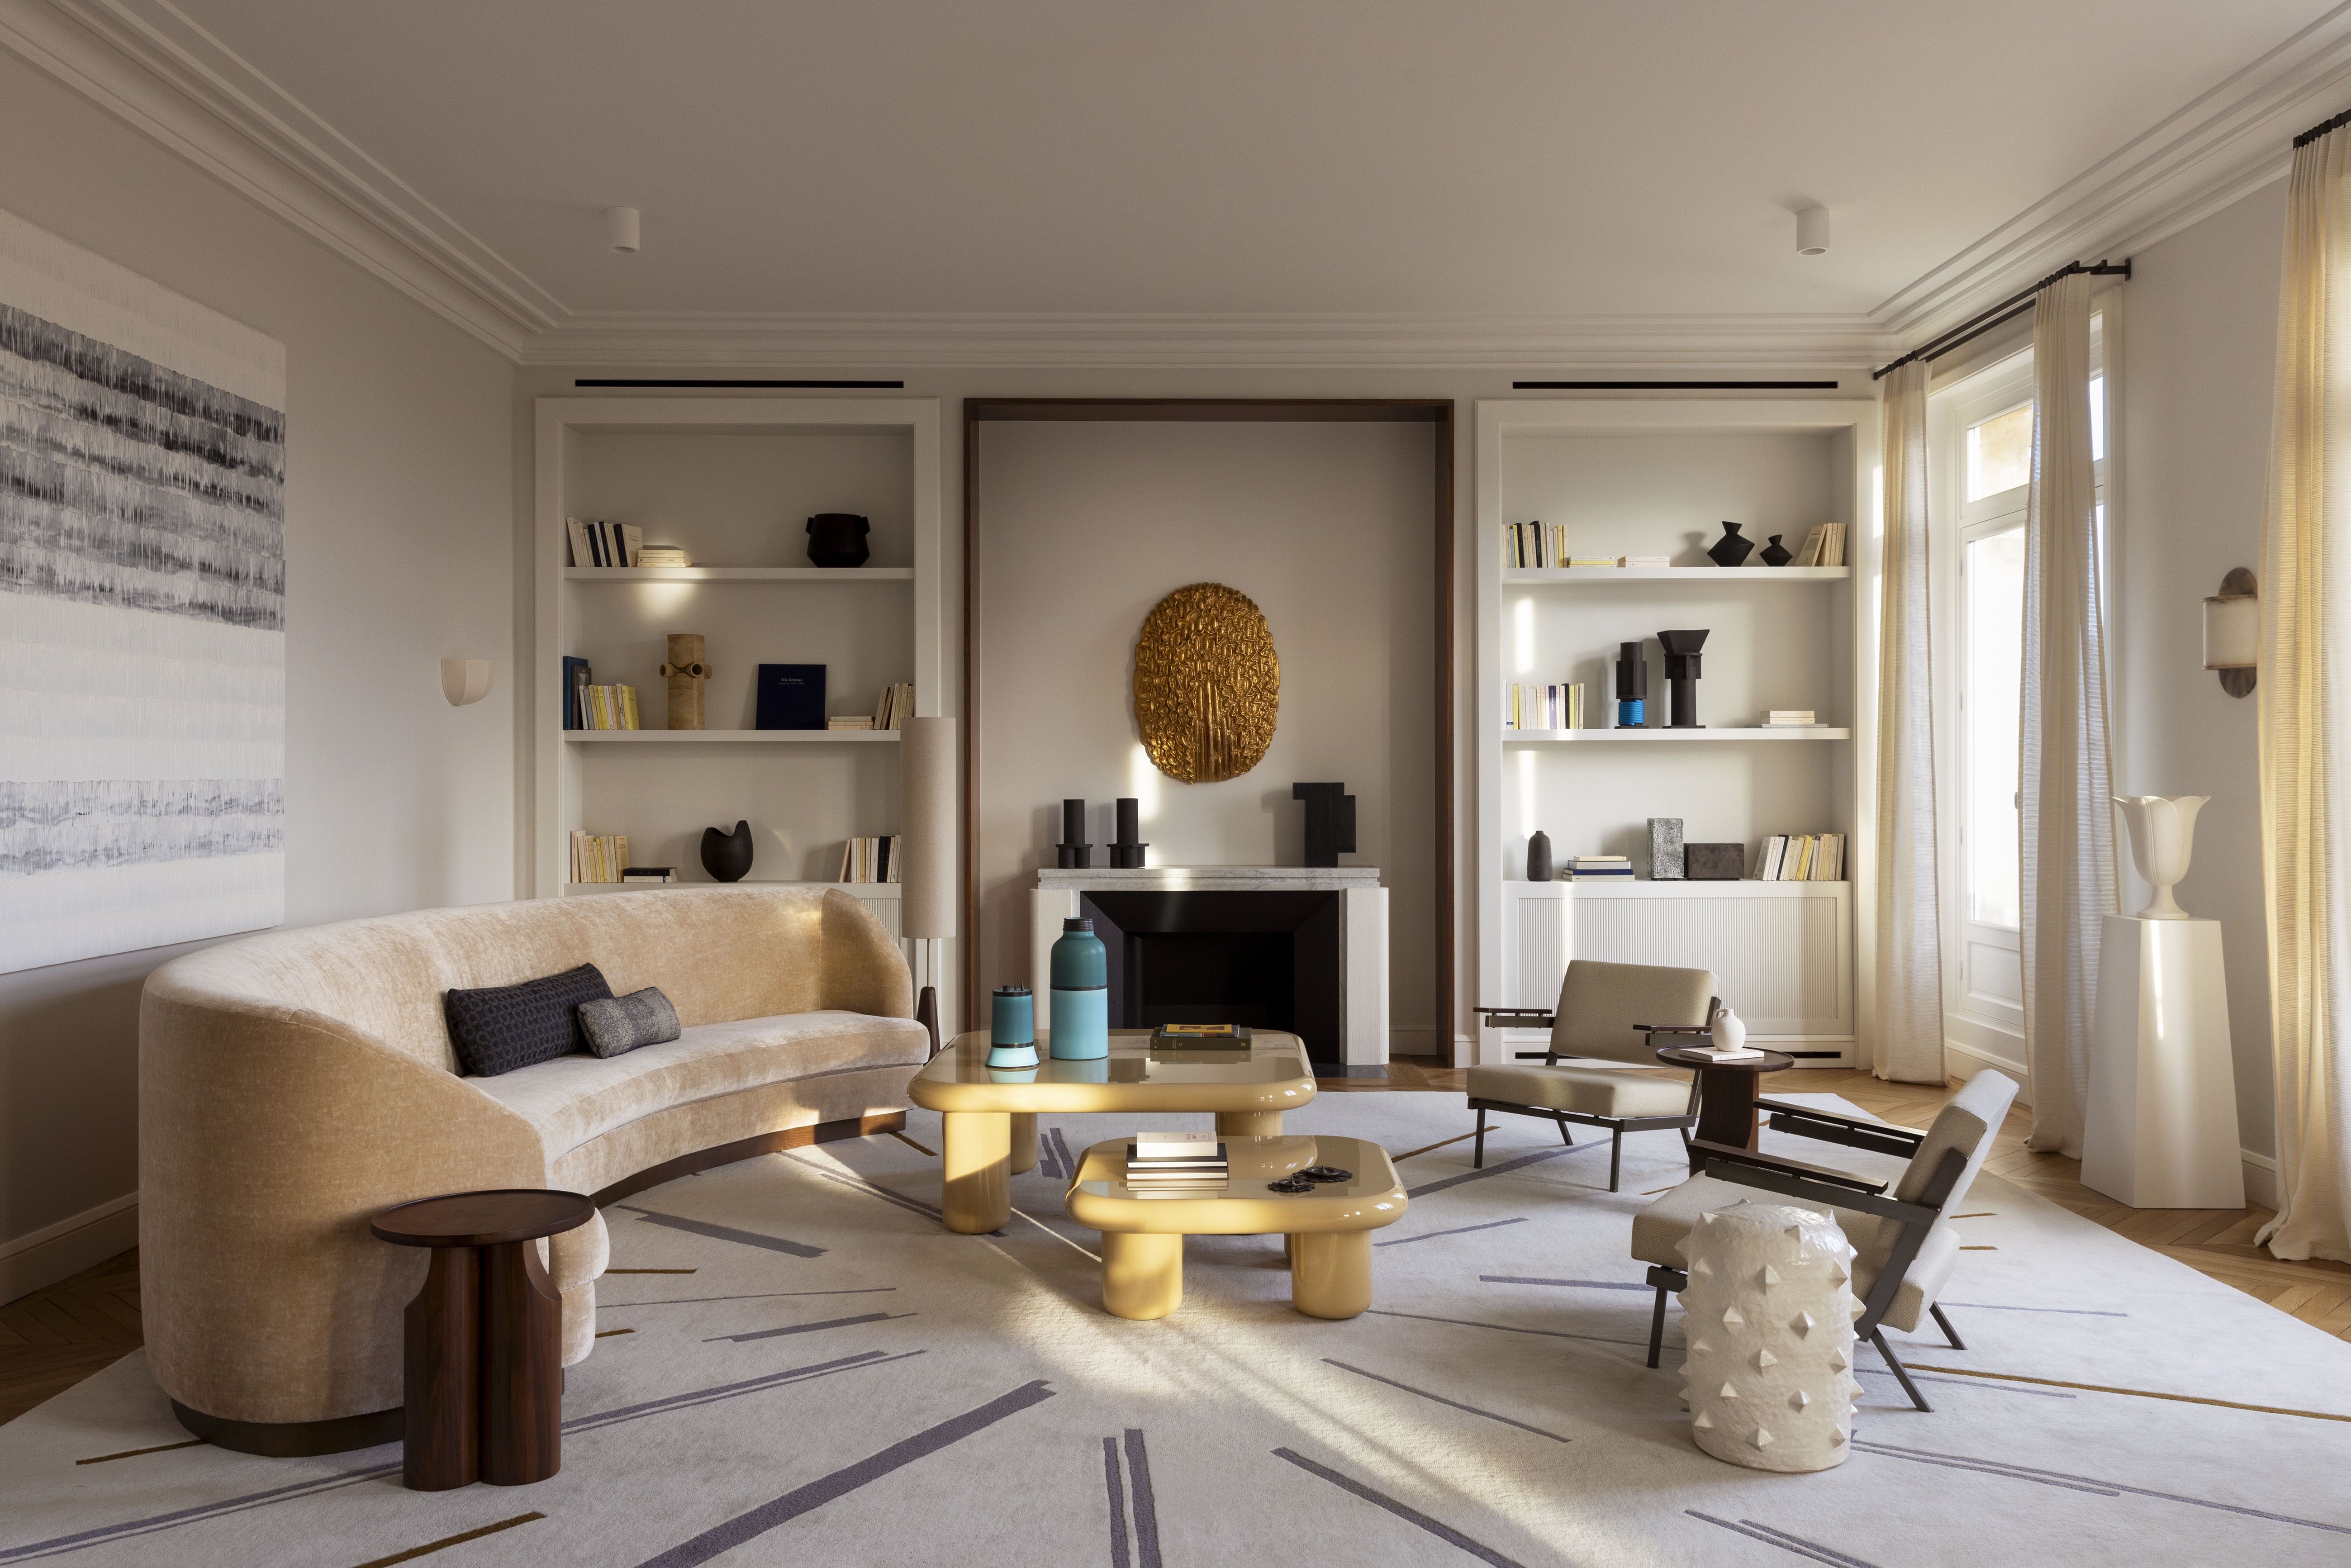 A luminous apartment worthy of the City of Light